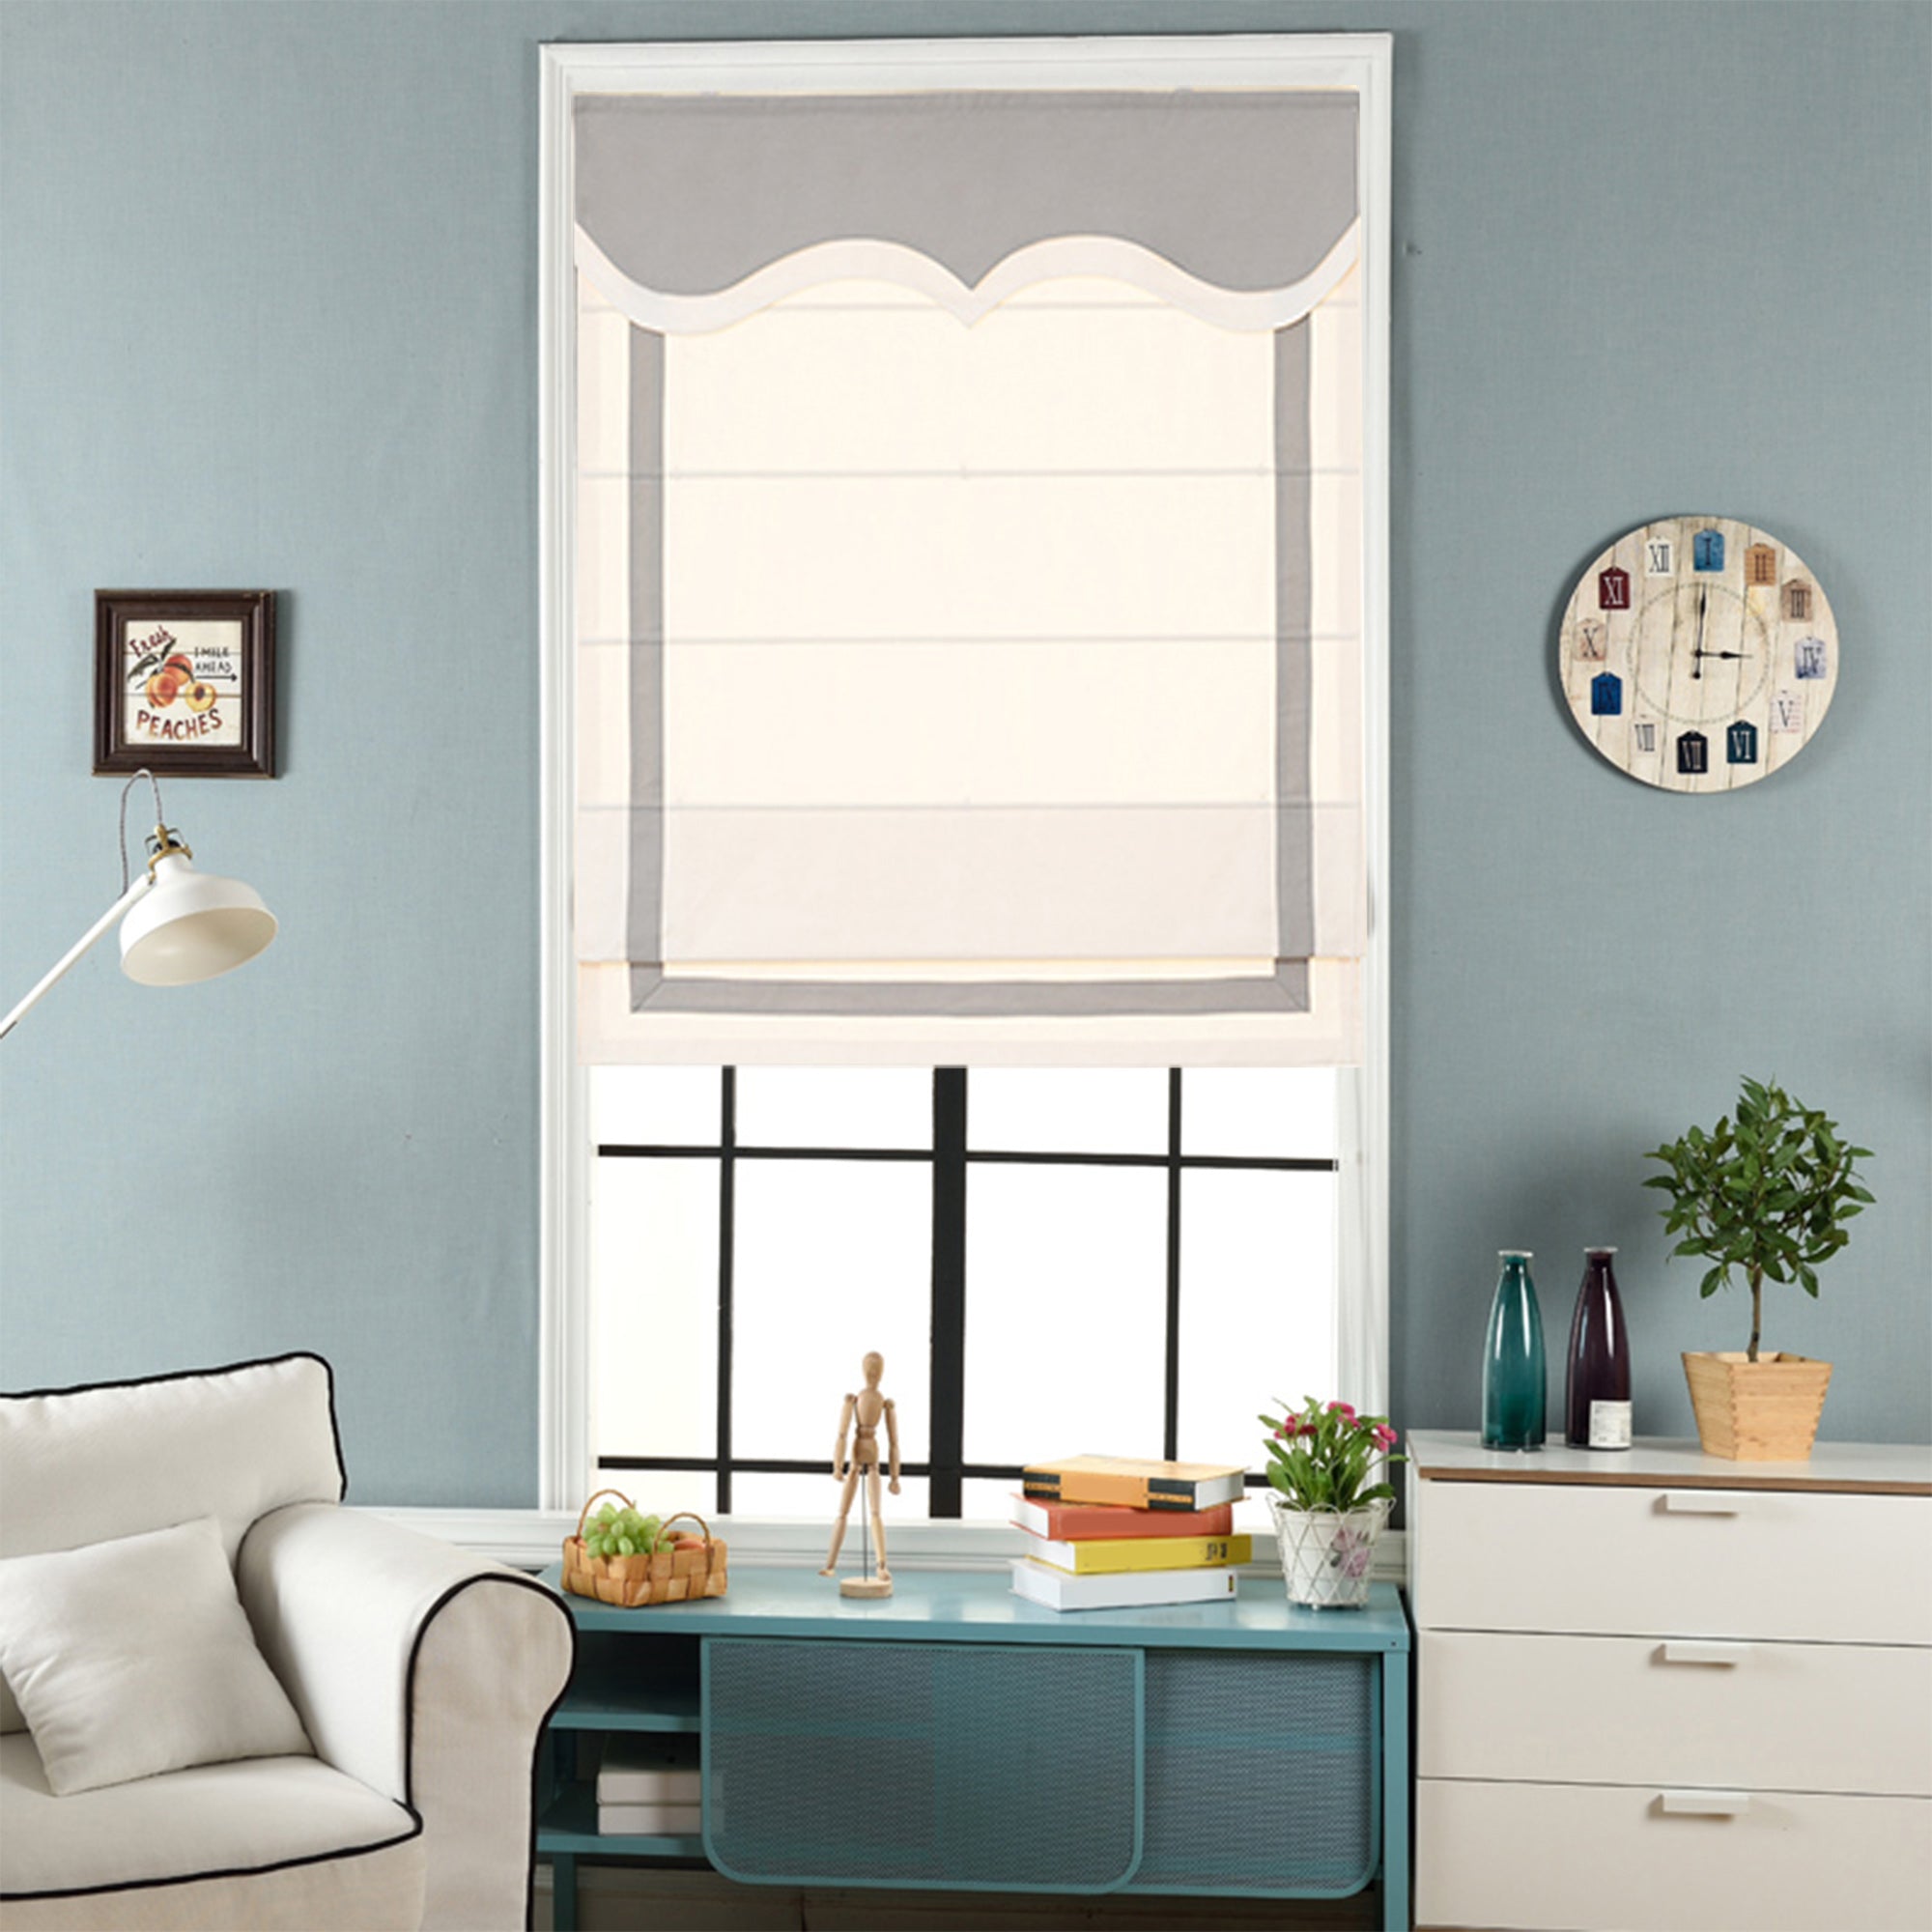 Quick Fix Washable Roman Window Shades Flat Fold with Valance, SG-008 White with Gray Trim